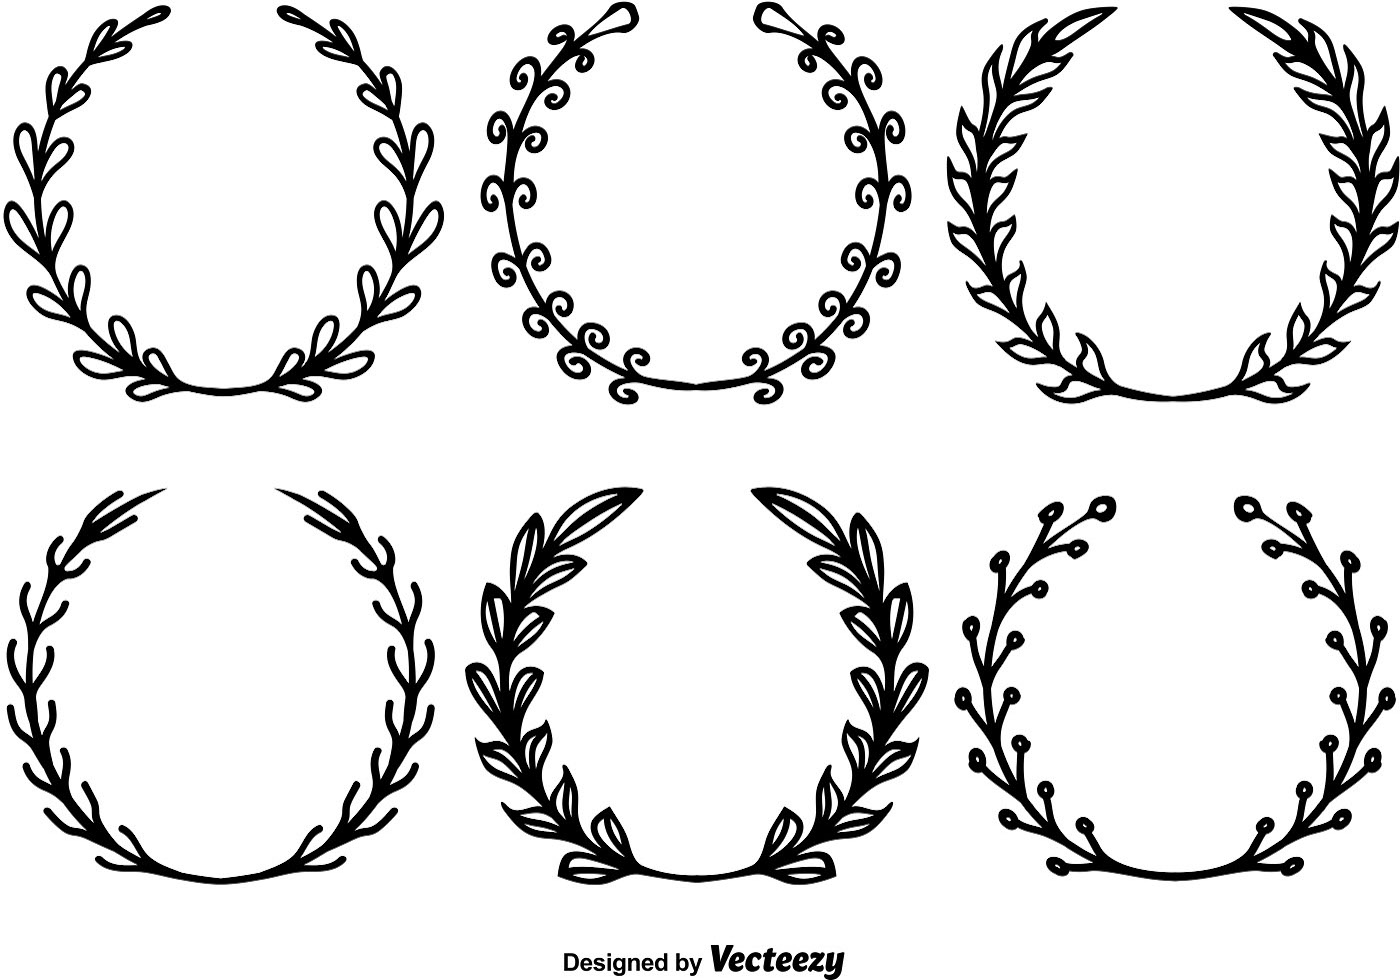 Half Wreath Svg Free - Layered SVG Cut File - Download Free All Font